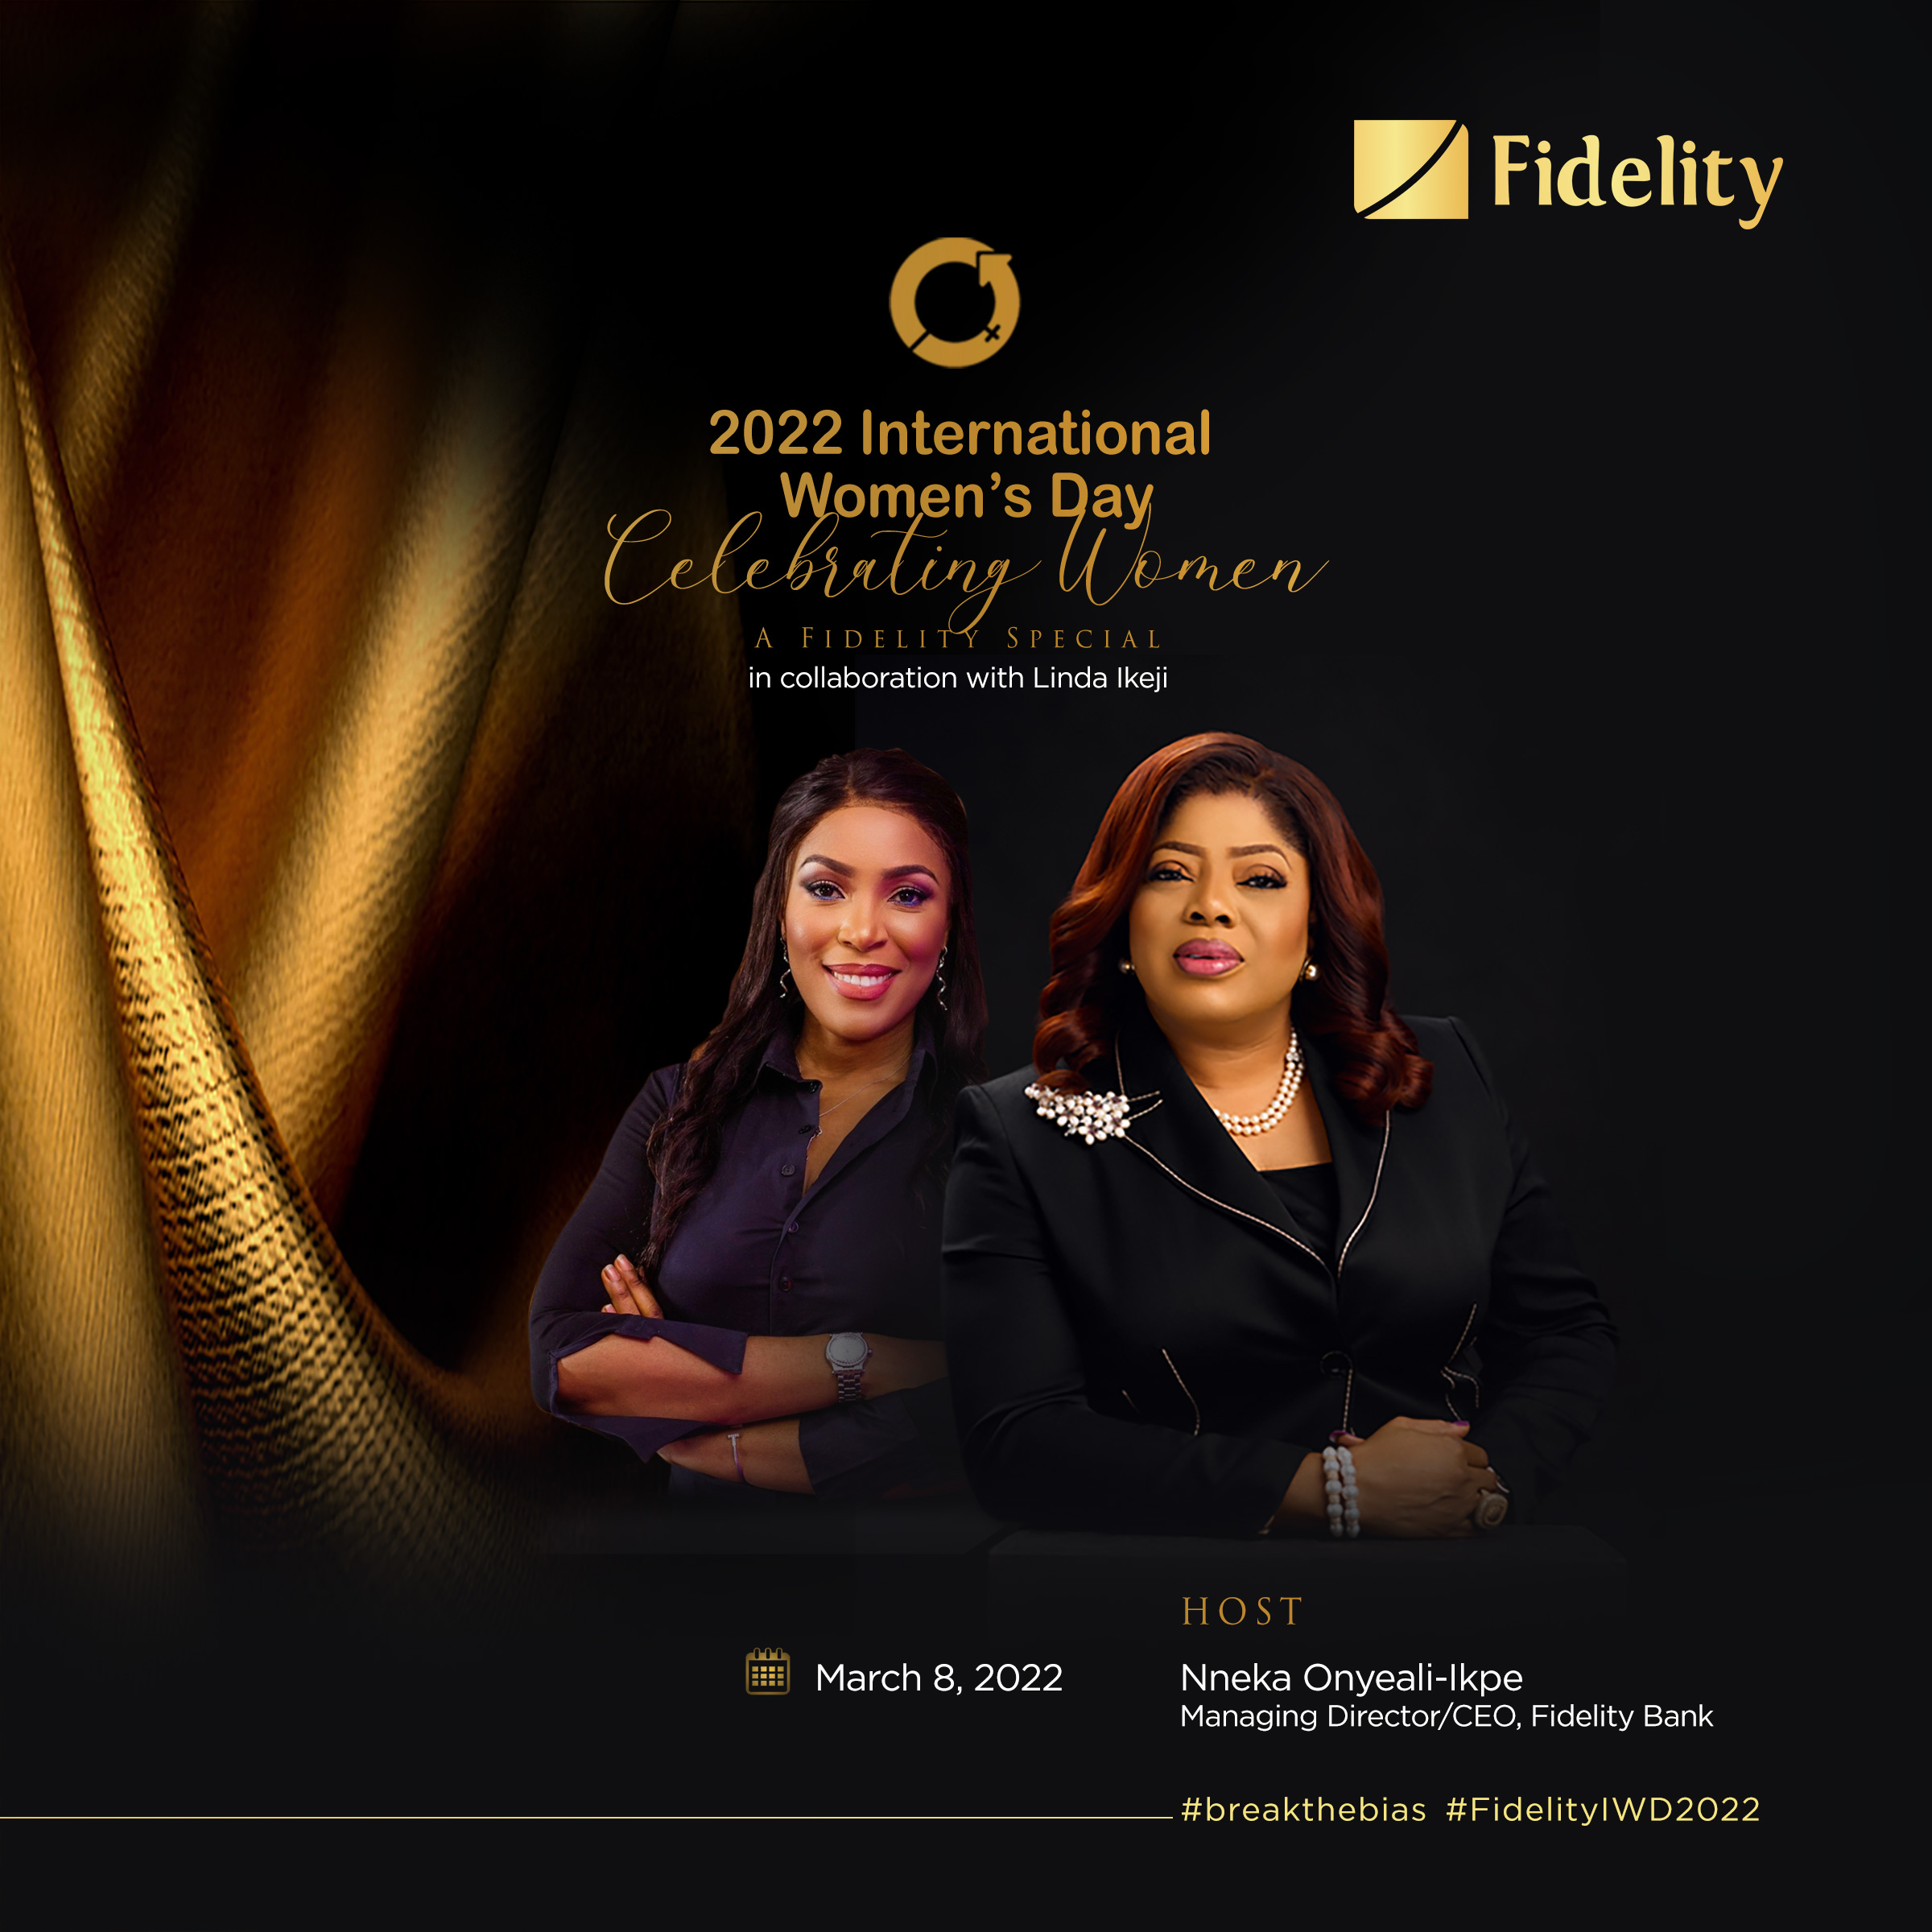 Fidelity Bank to celebrate International Women’s Day with Community-Driven Proposition